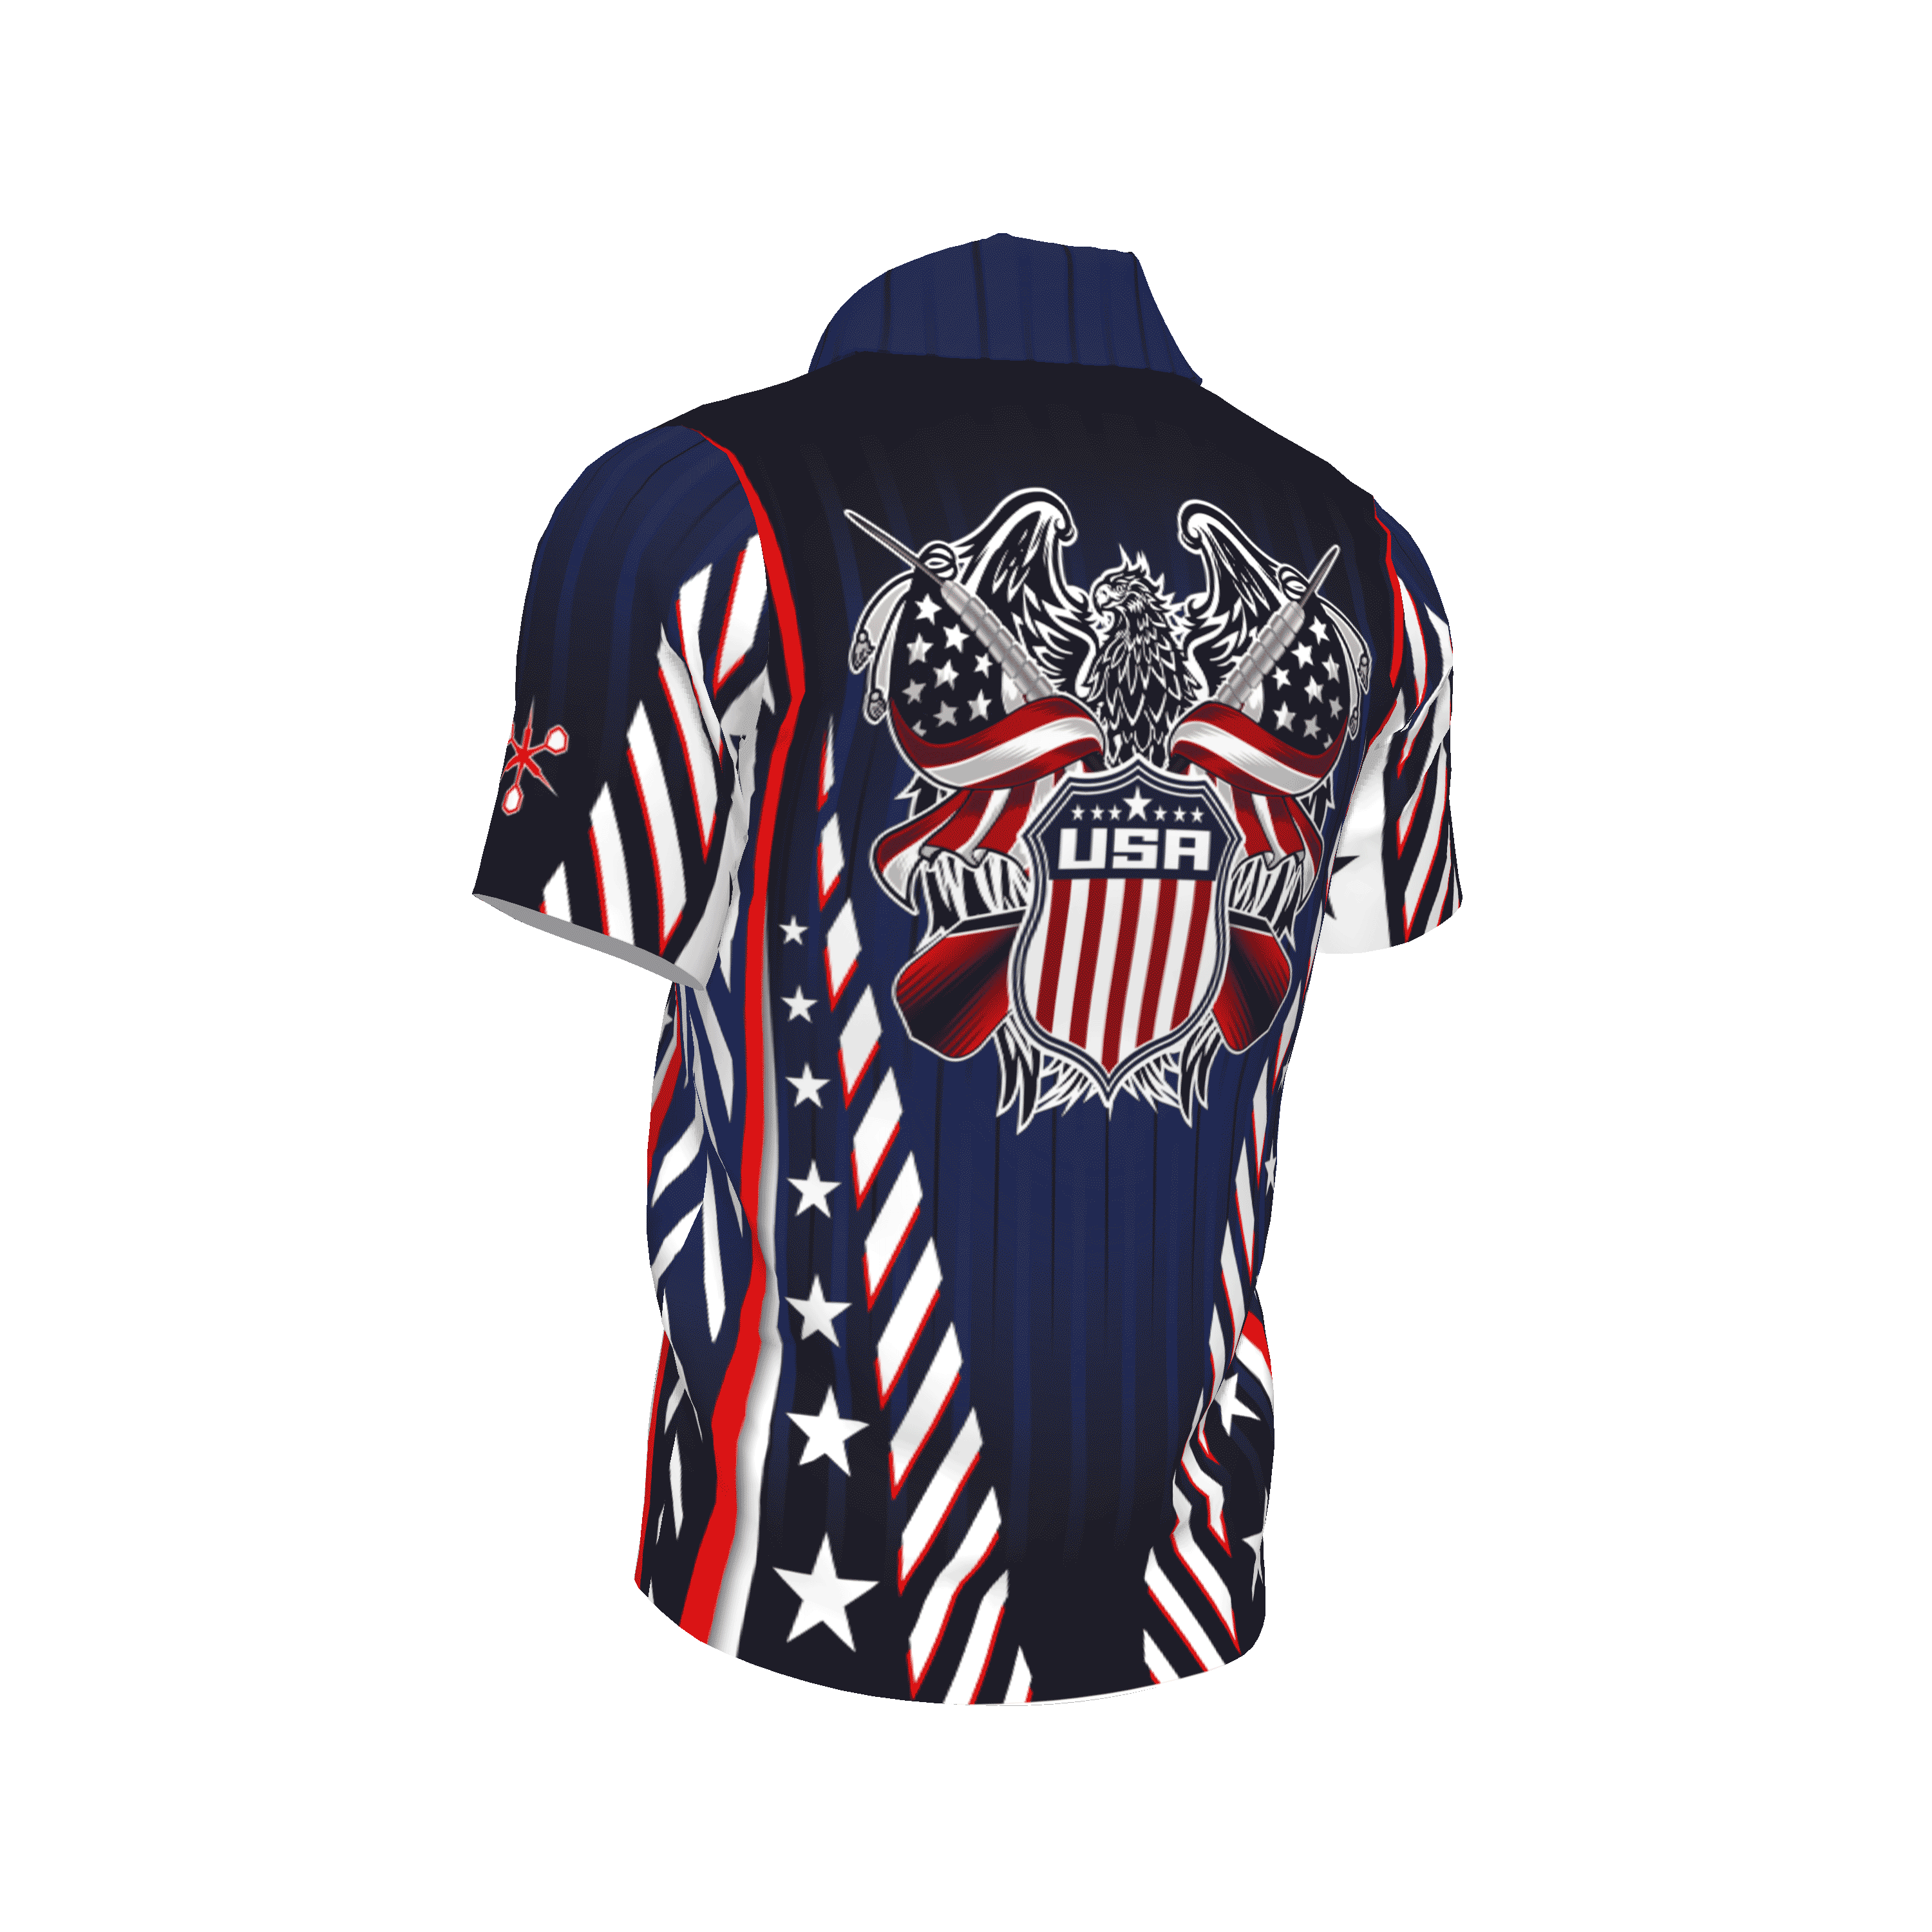 Compete Comfortably | Sublimated Jerseys for Teams Large and Small